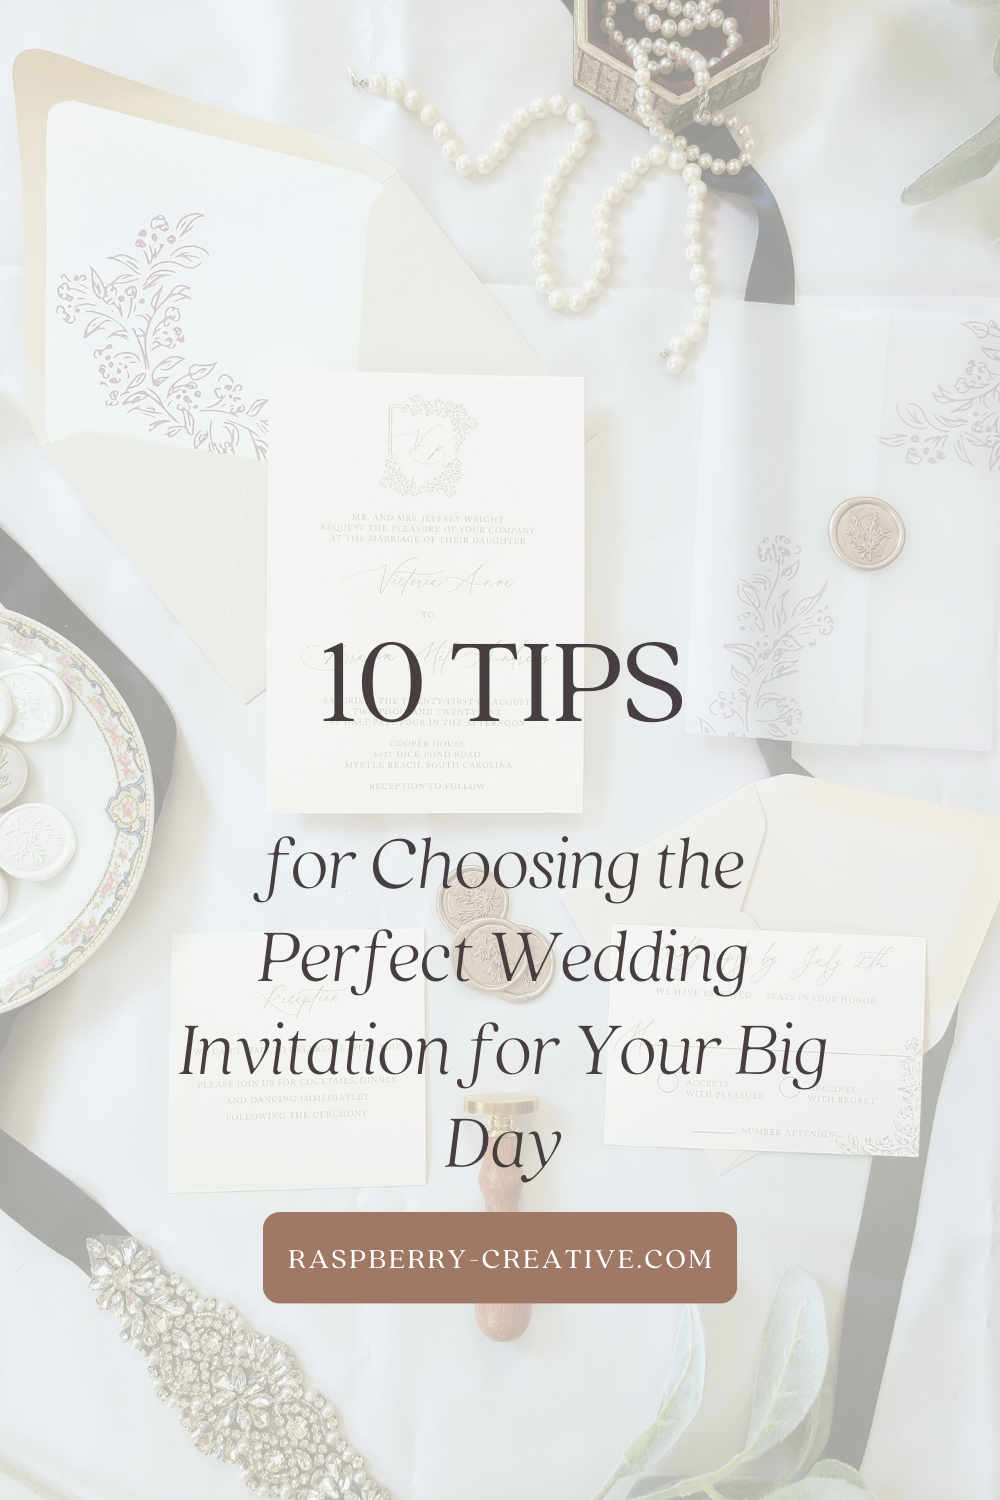 10 tips for Choosing the Perfect Wedding Invitation for Your Big Day